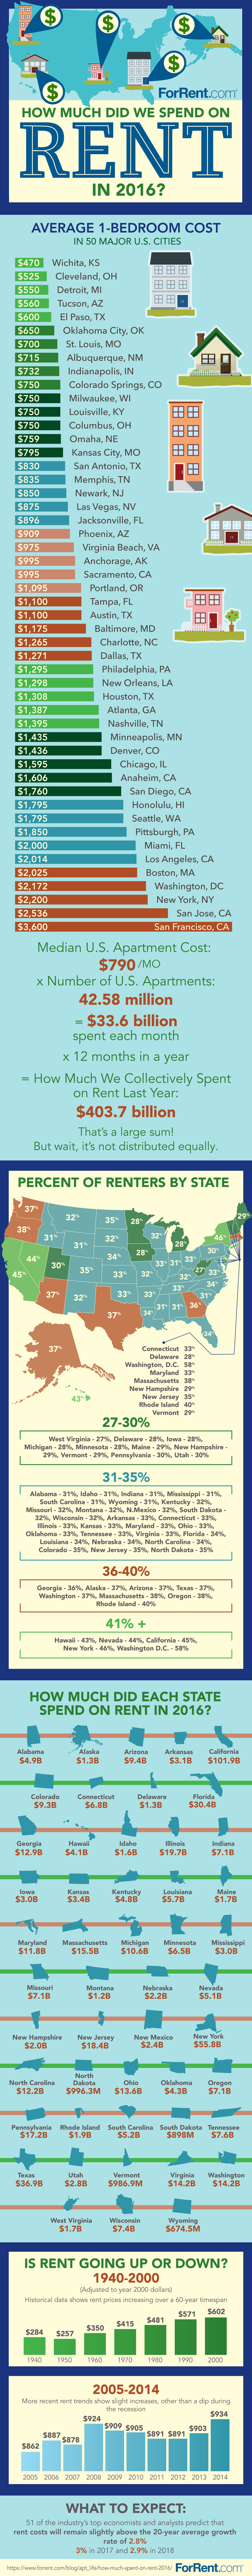 Here’s How Much Money You Spent on Rent Last Year